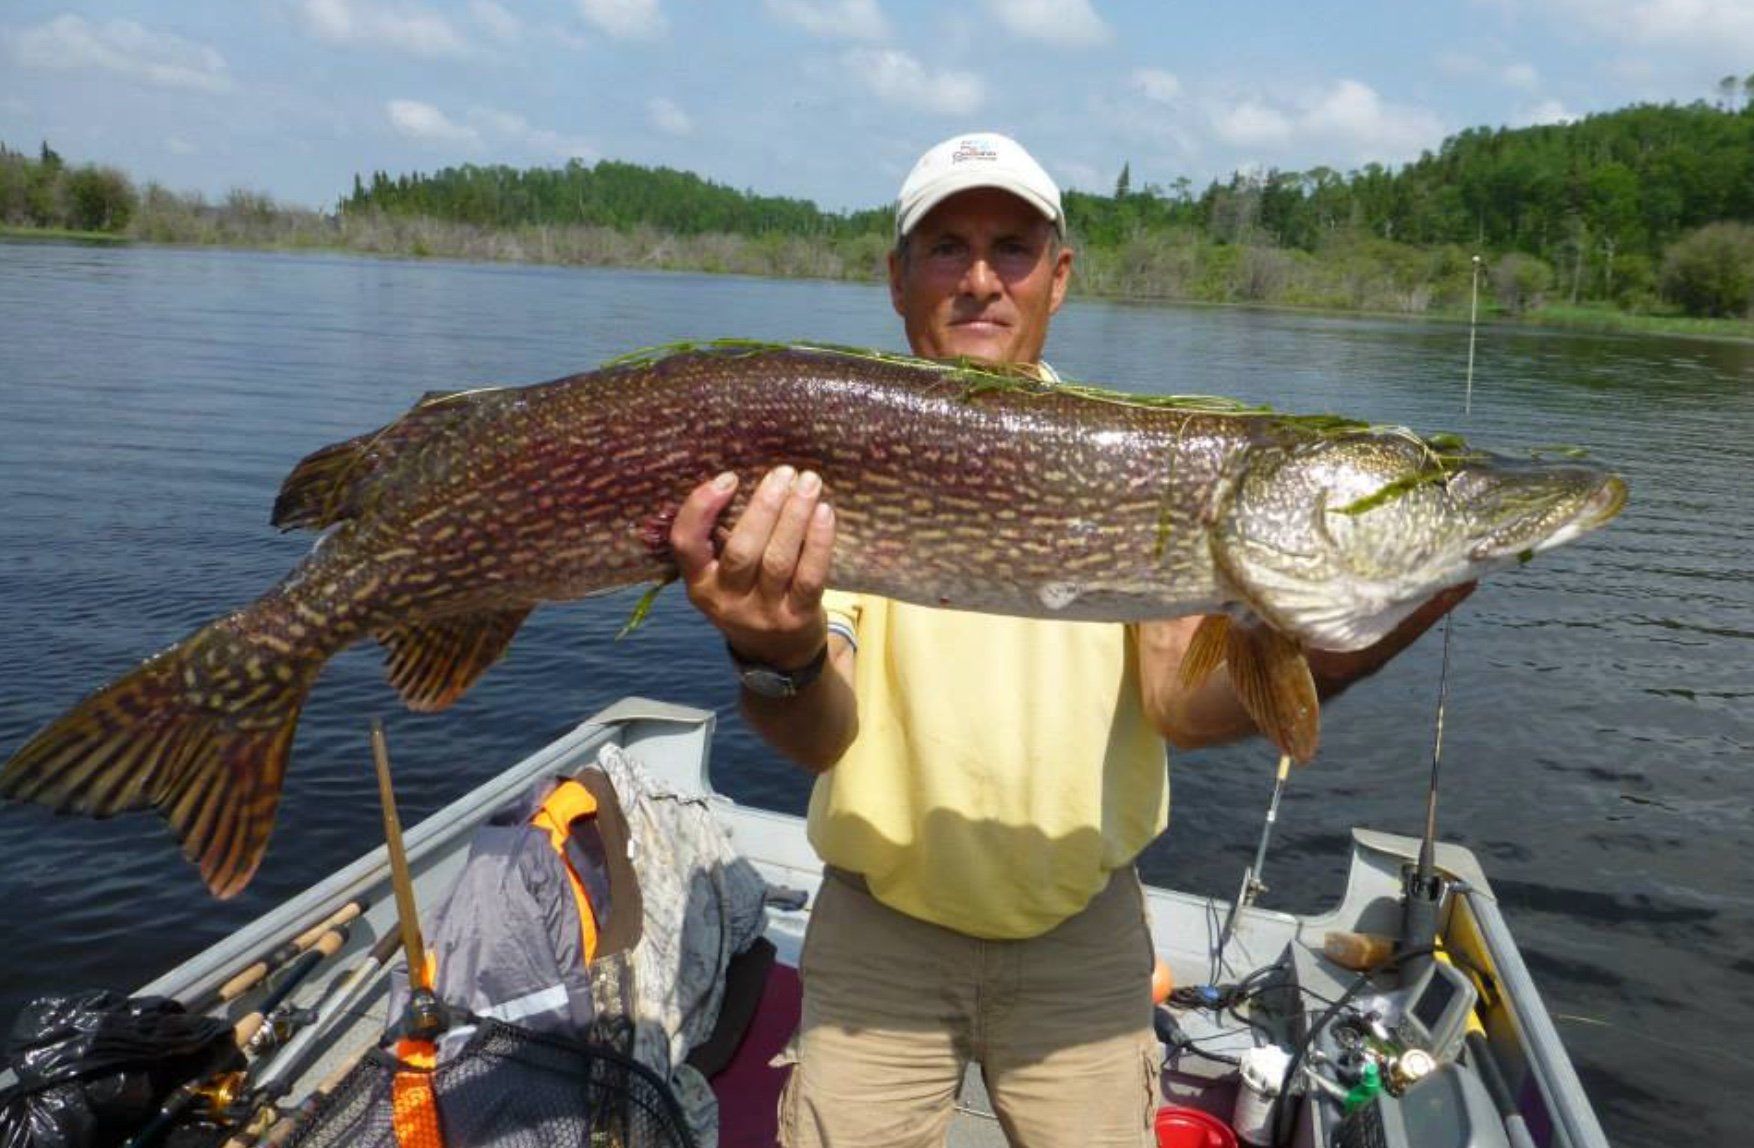 northern pike held my angler in boat.